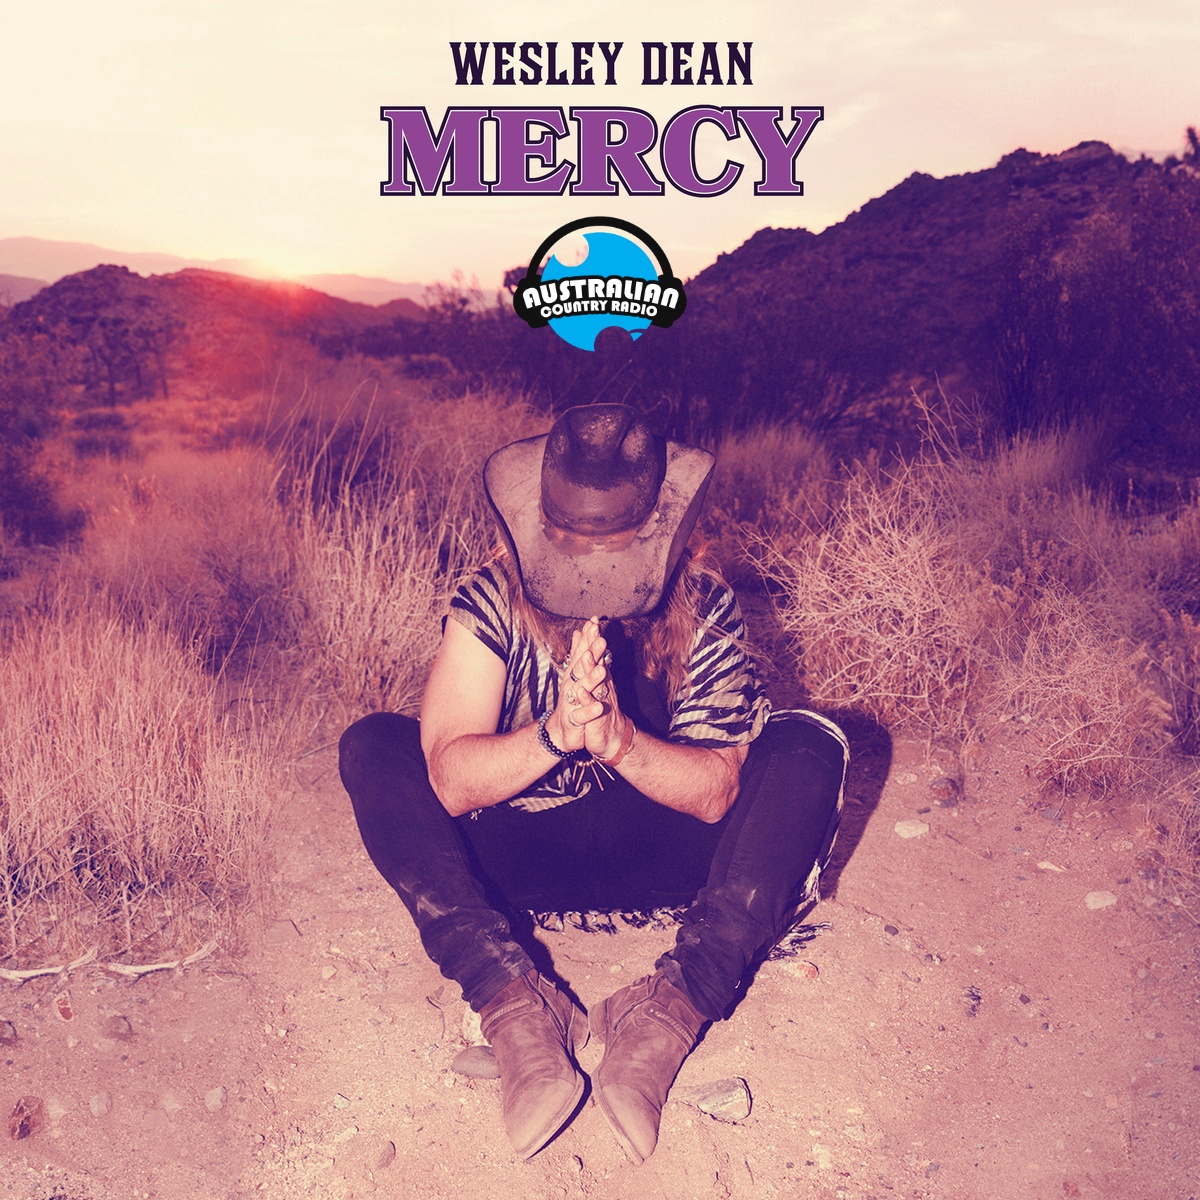 Playing now and every day on Australian Country Radio Australia's Home of Australian Country Music. 'Mercy' by Wesley Dean @wesleydeanmusic @VarrassoPR @tunein @radiofmapp